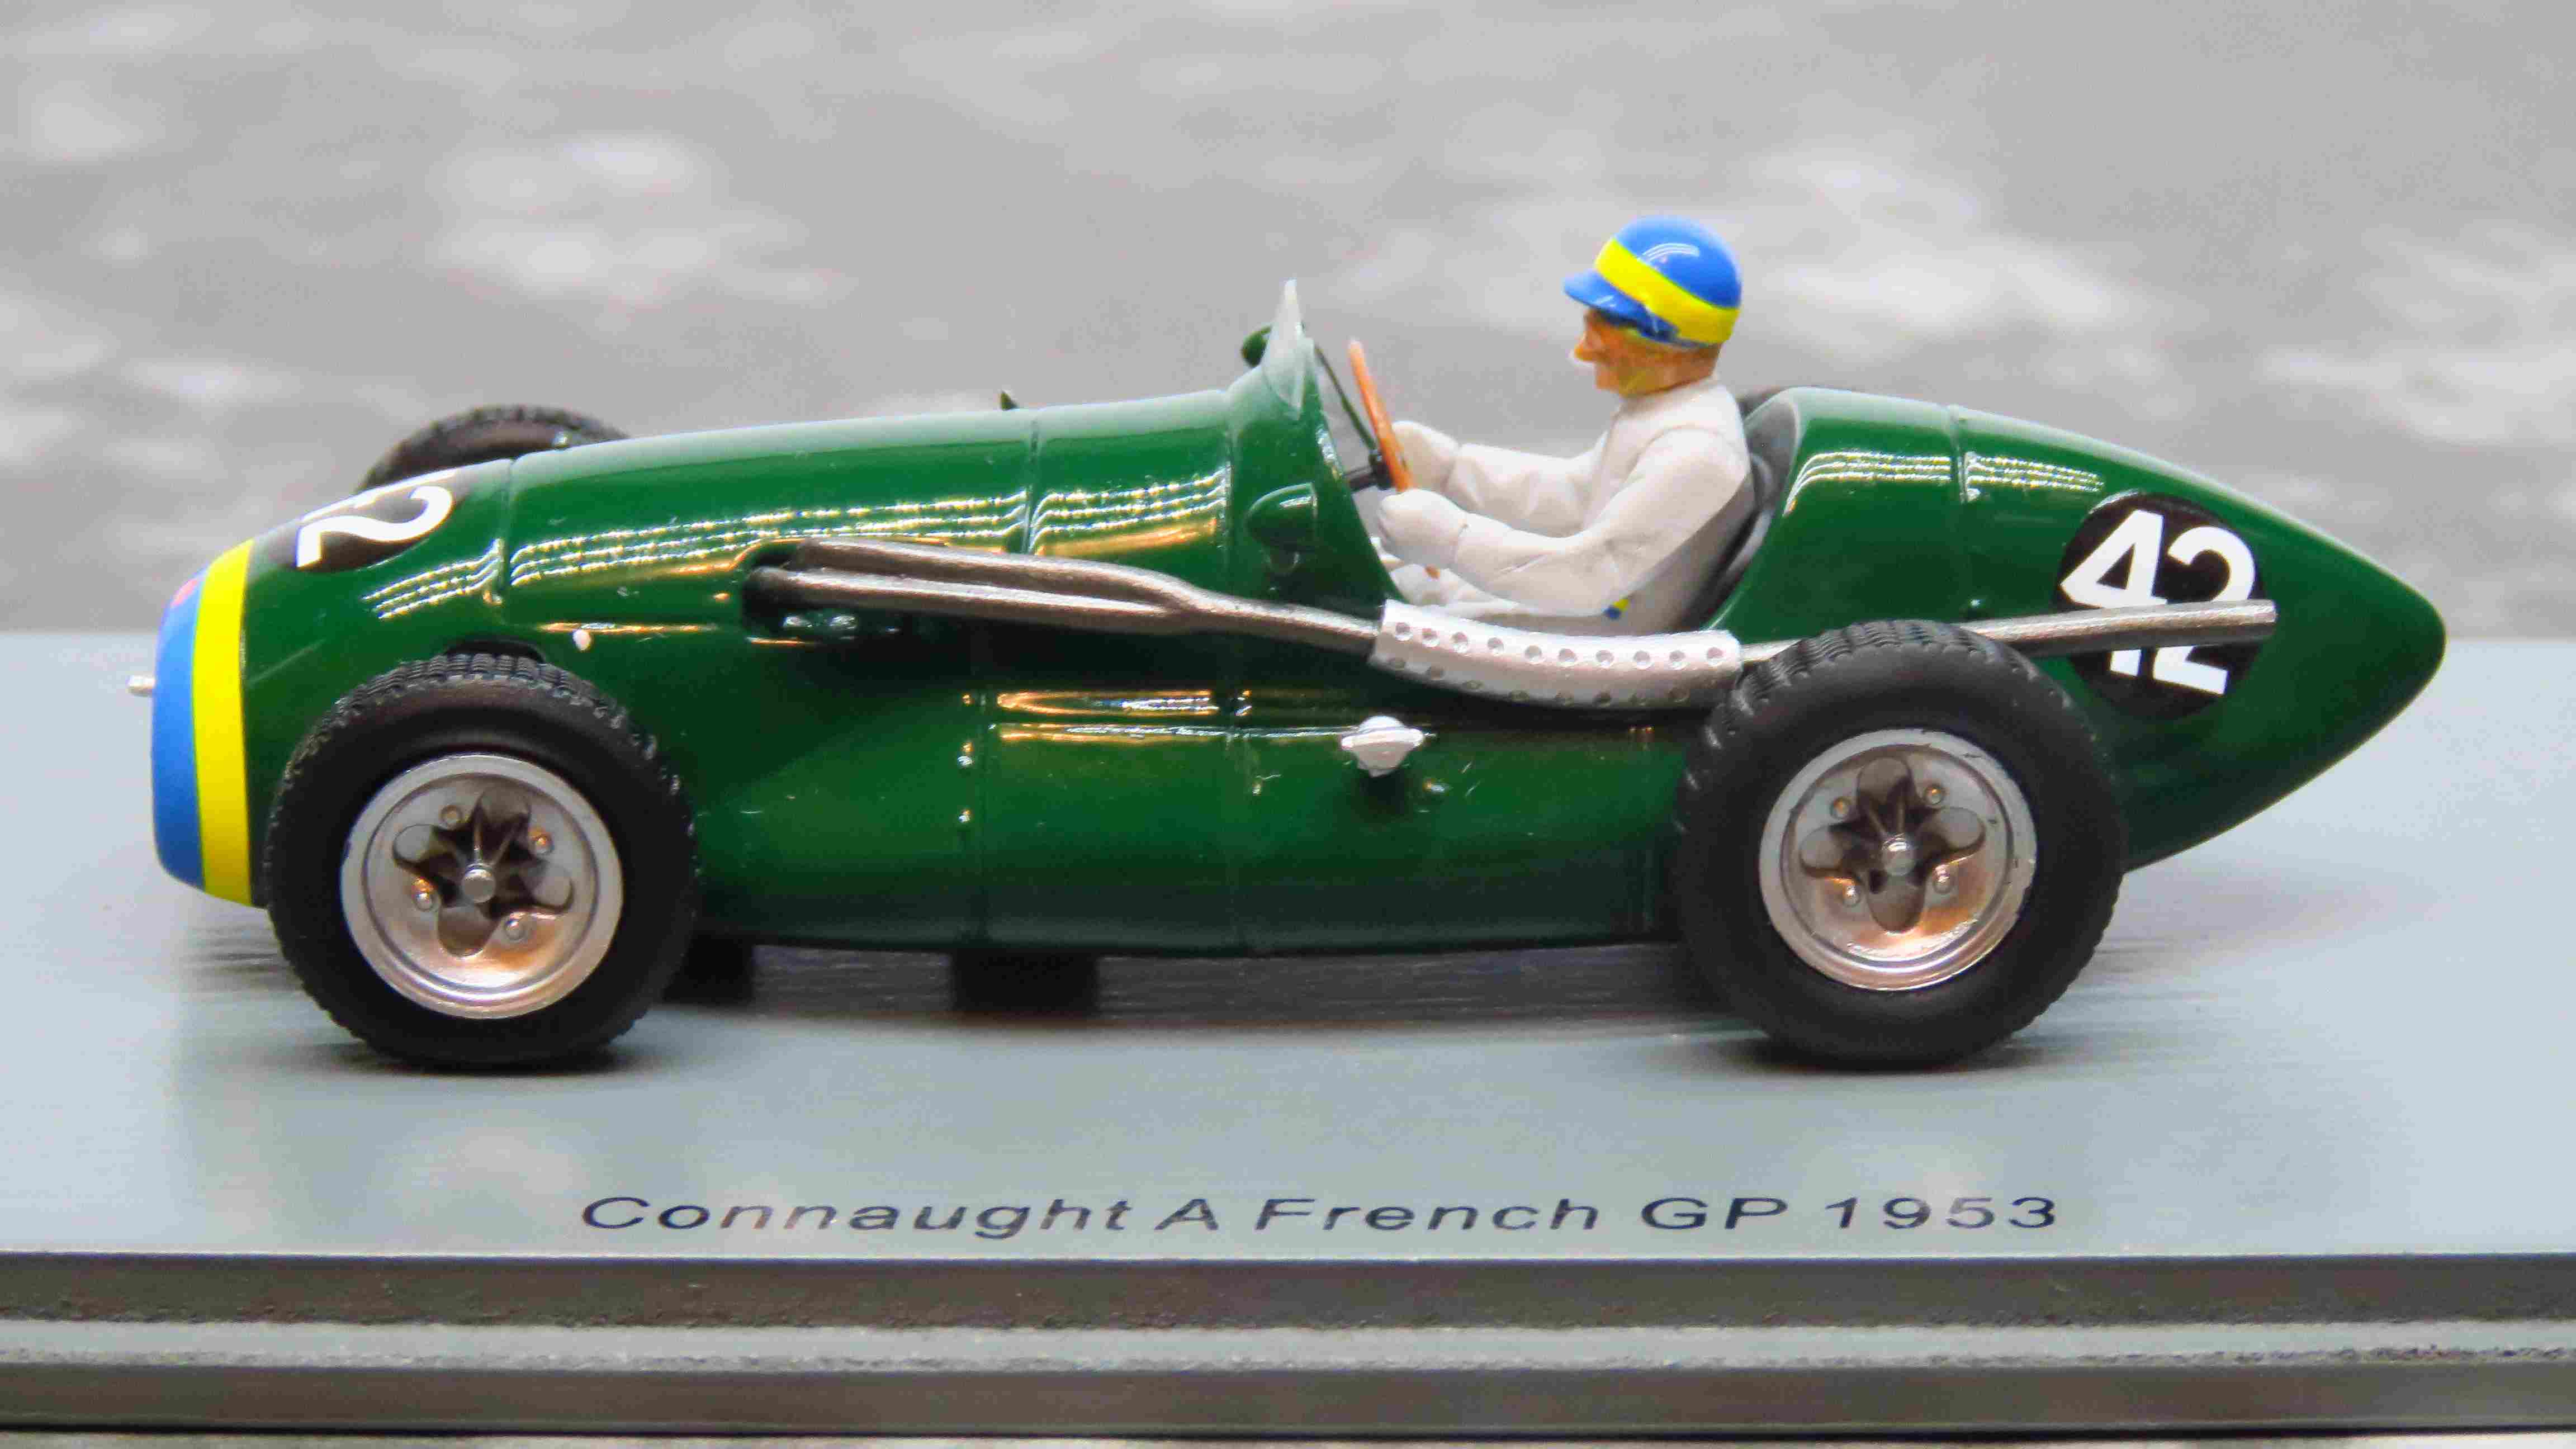 Connaught A No.42 French GP 1953 Prince Bira /Spark S7243 1:43/